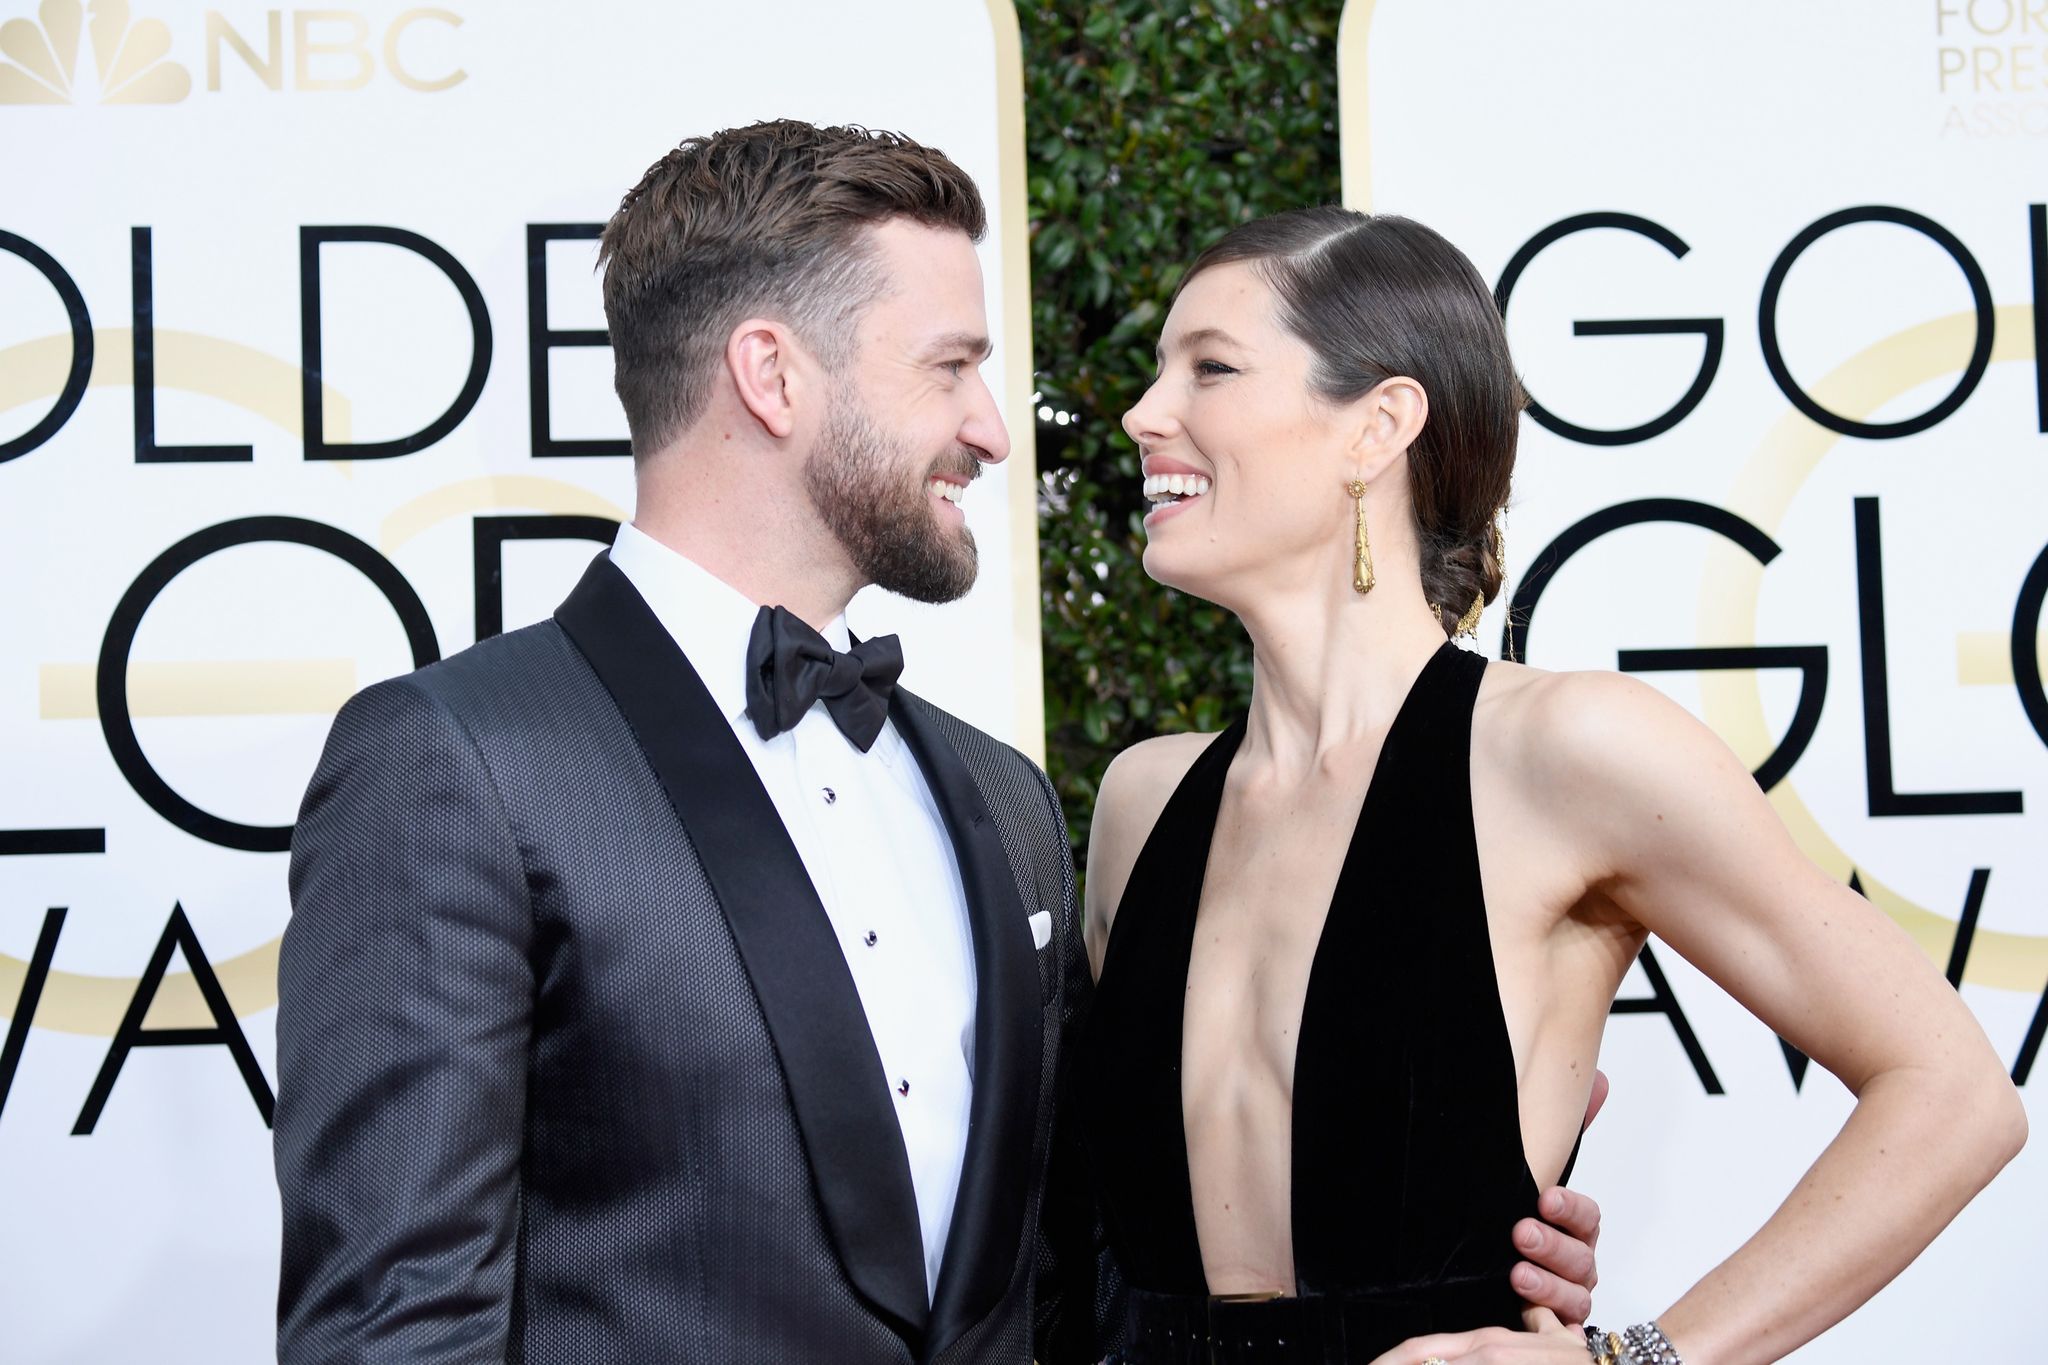 Justin Timberlake Shares 'Social Distancing' Photo With Jessica